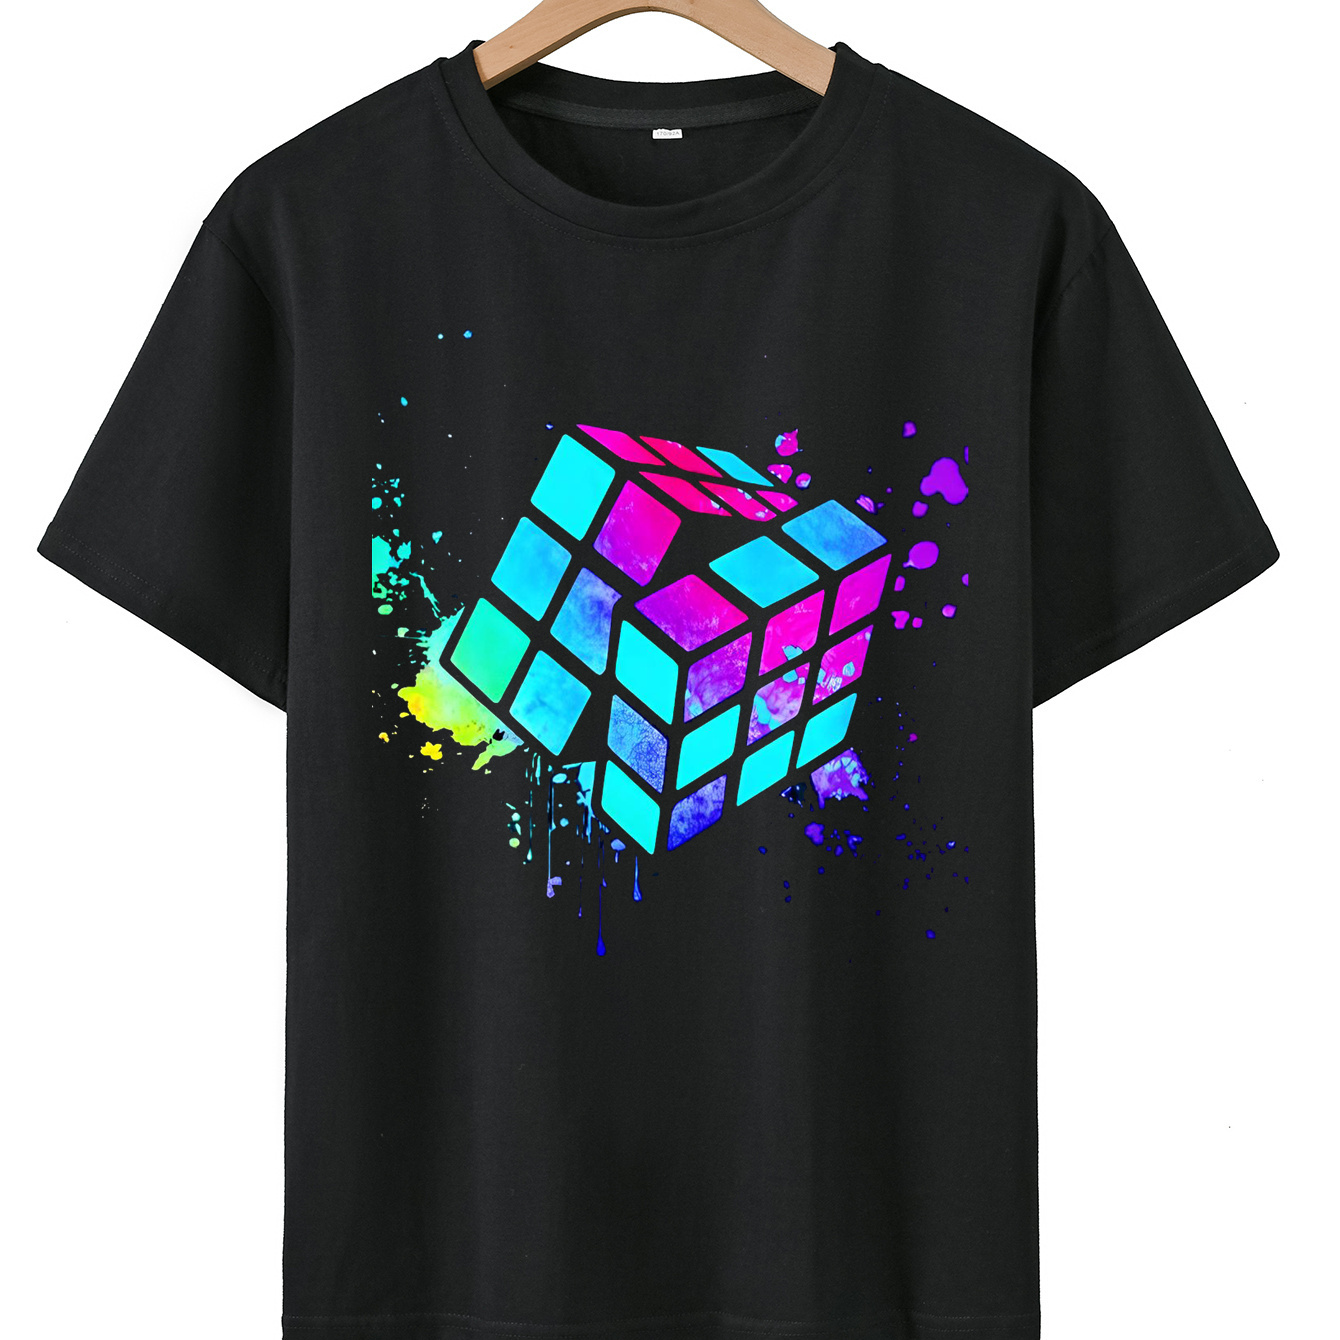 

Color Splash Cube Print Crew Neck T-shirt, Short Sleeve Casual Comfortable Summer Tee Tops For Boys